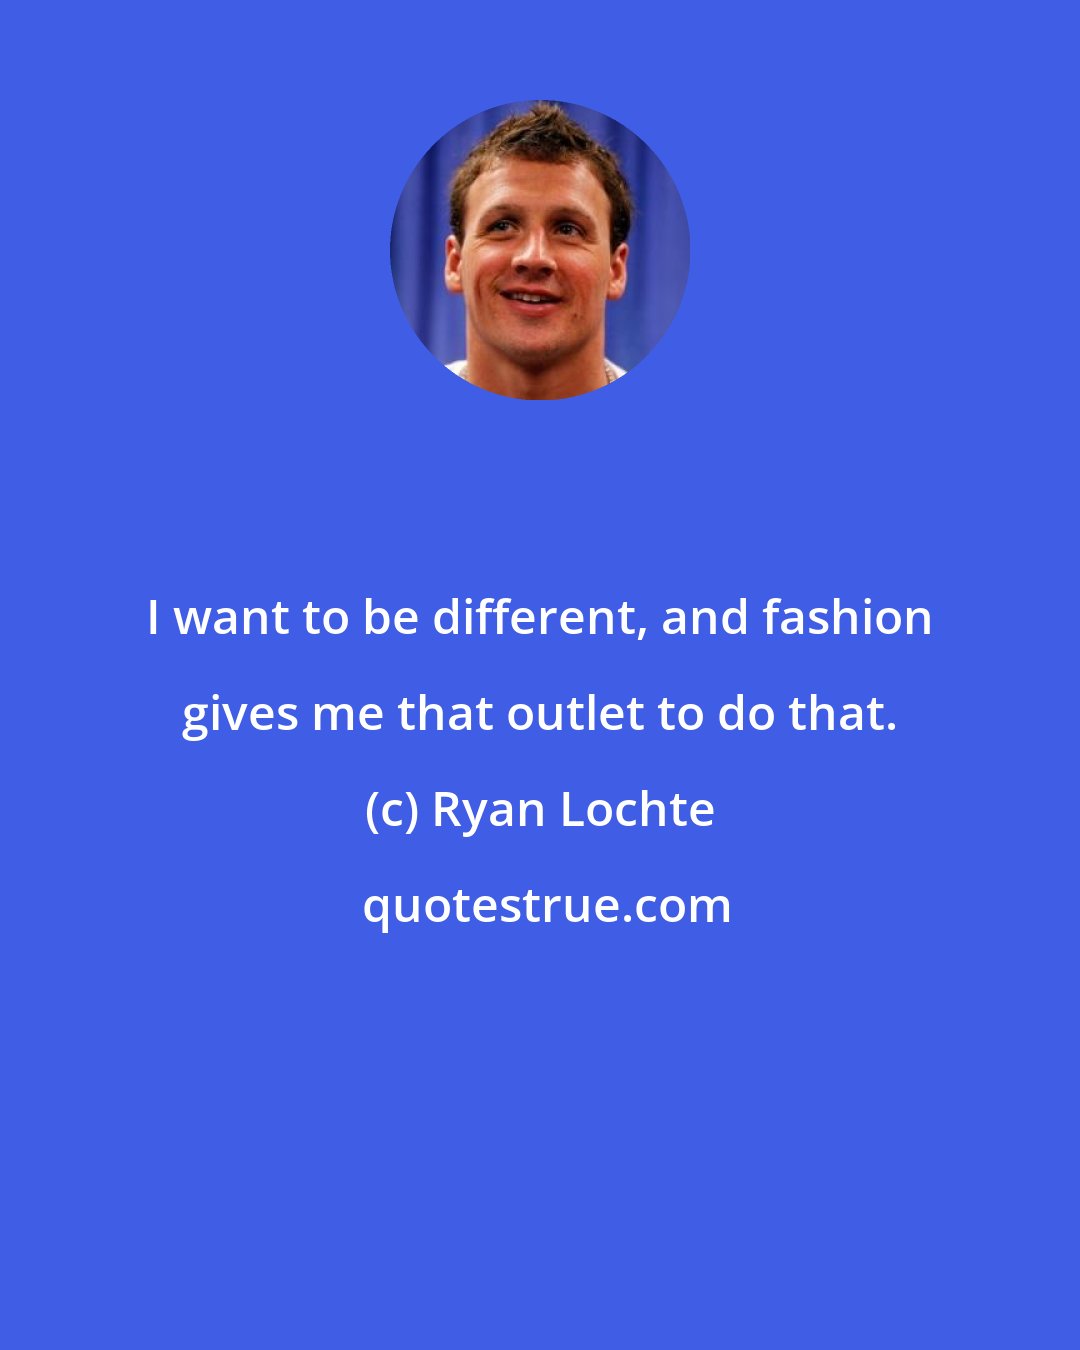 Ryan Lochte: I want to be different, and fashion gives me that outlet to do that.